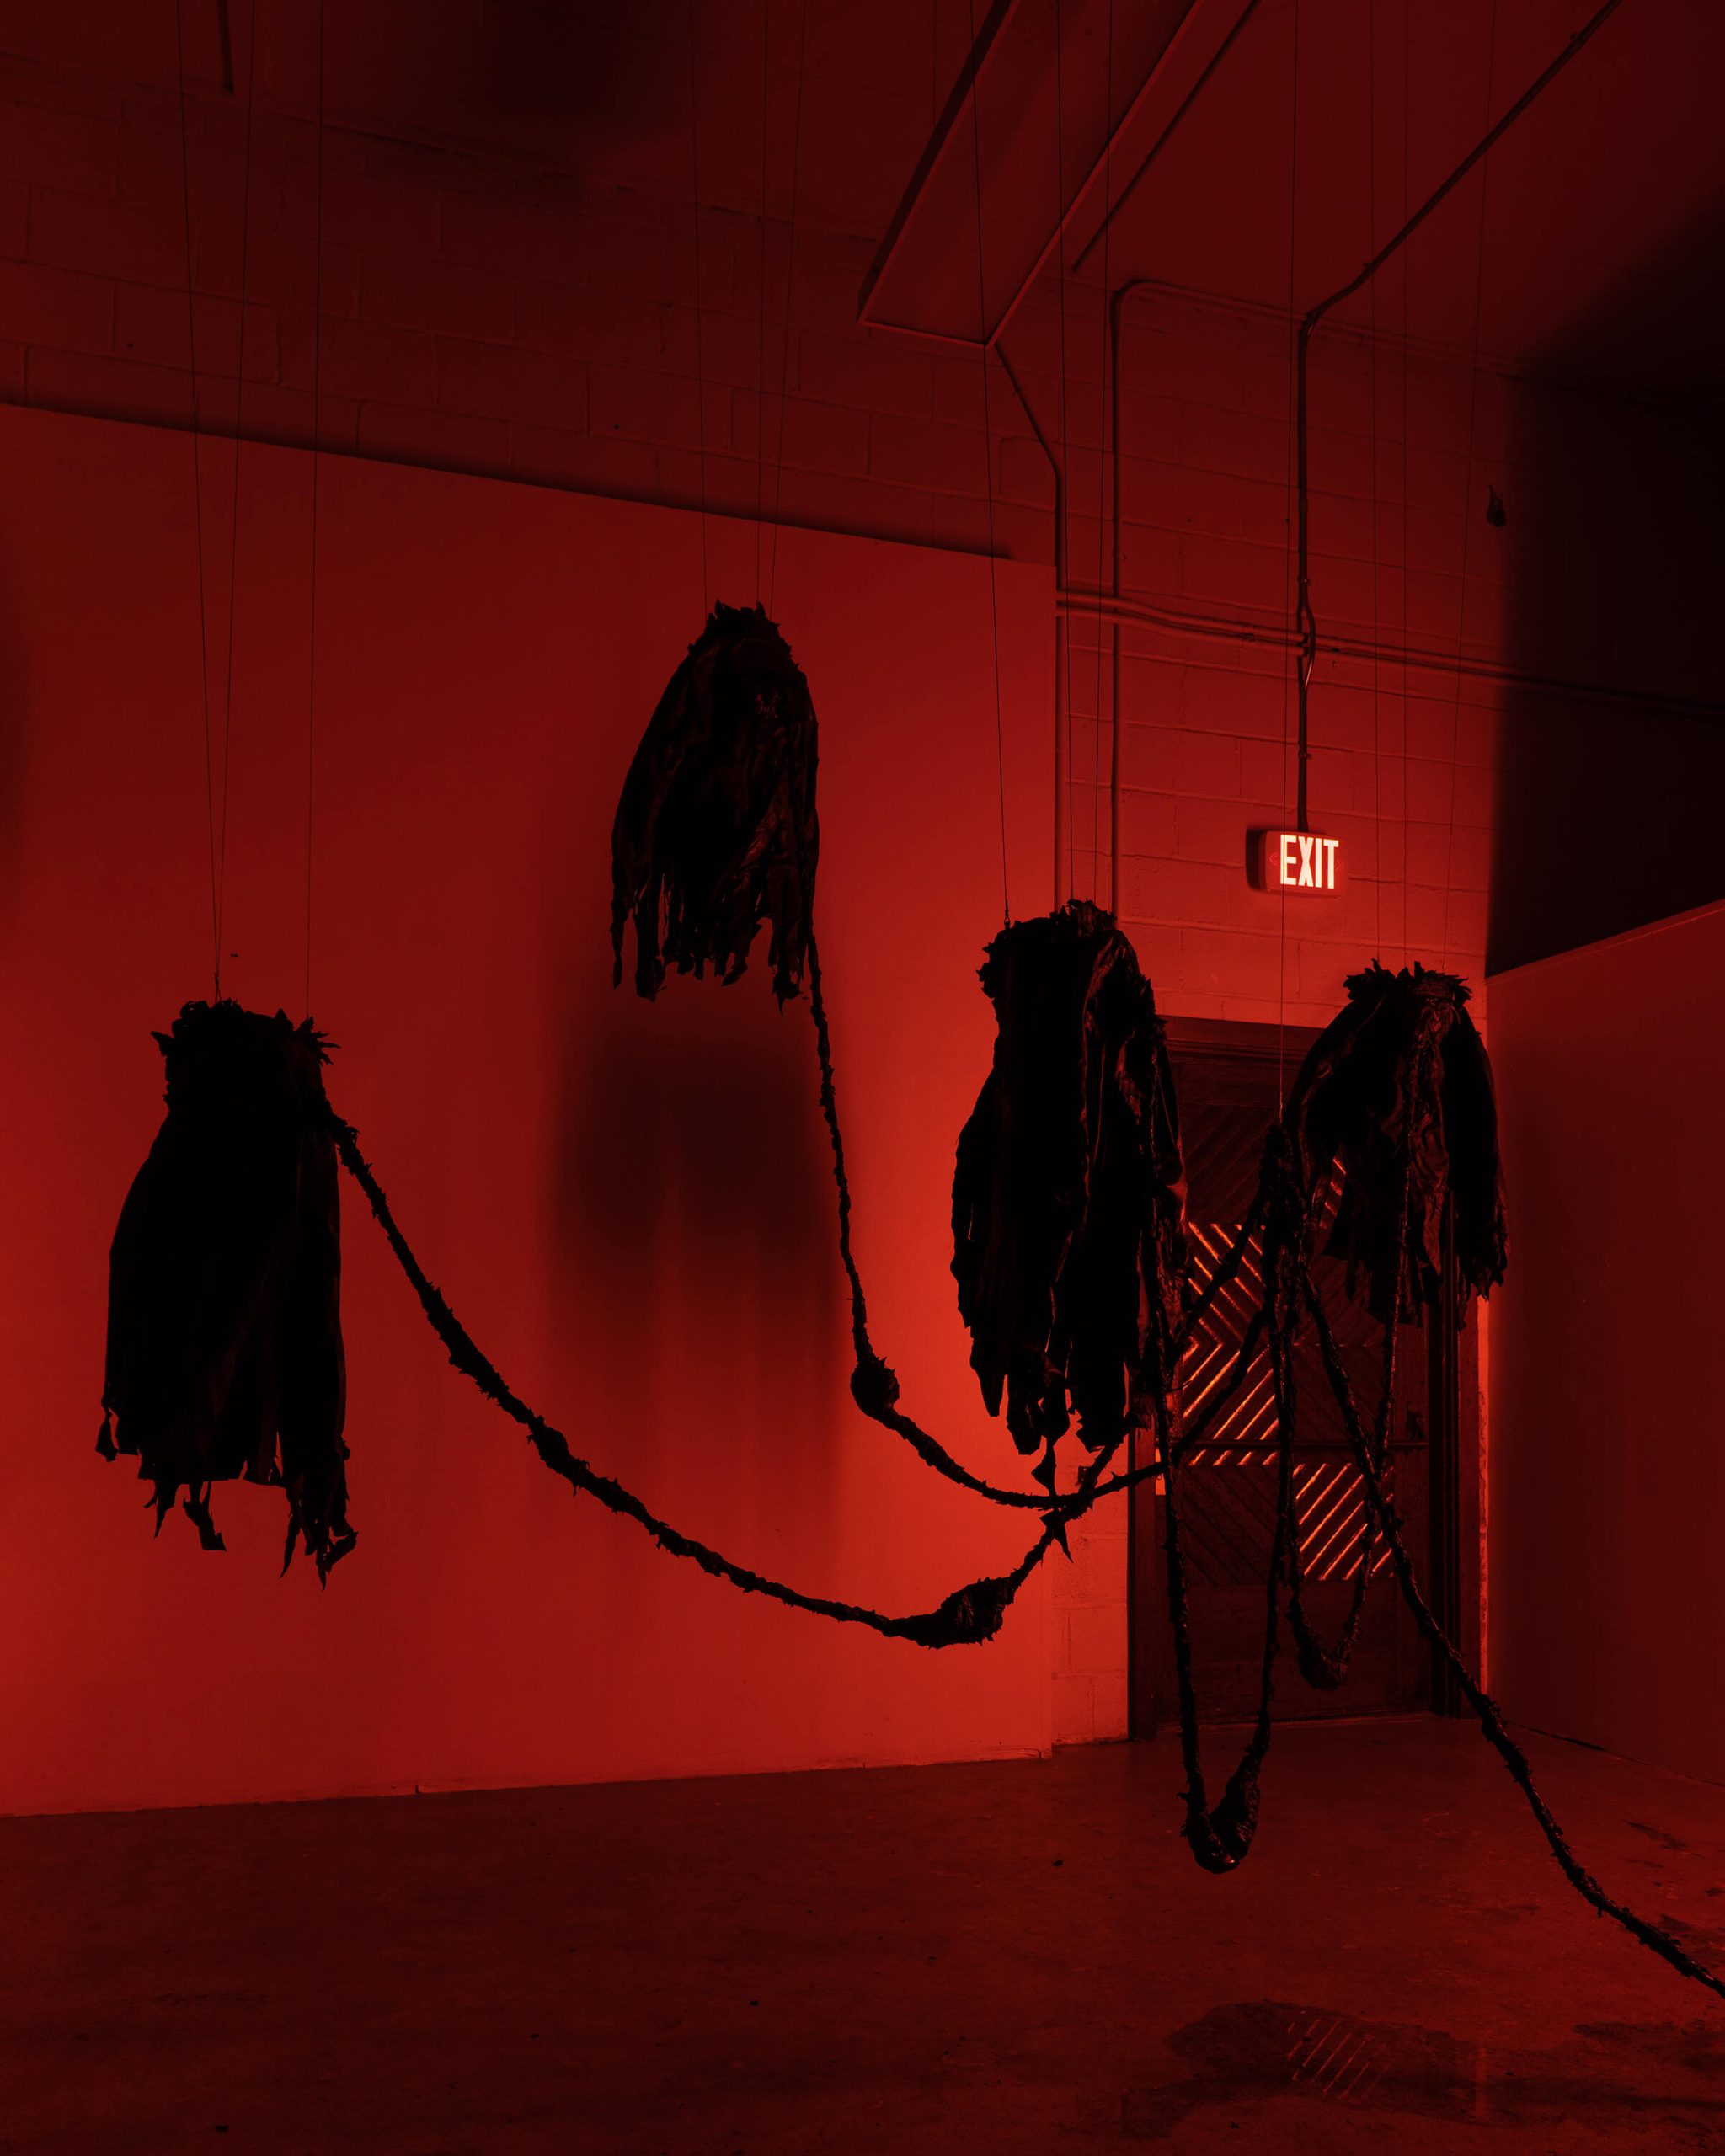 Organic, irregular black sculptures shaped like bunches of rope hand in a dim room lit with red light.